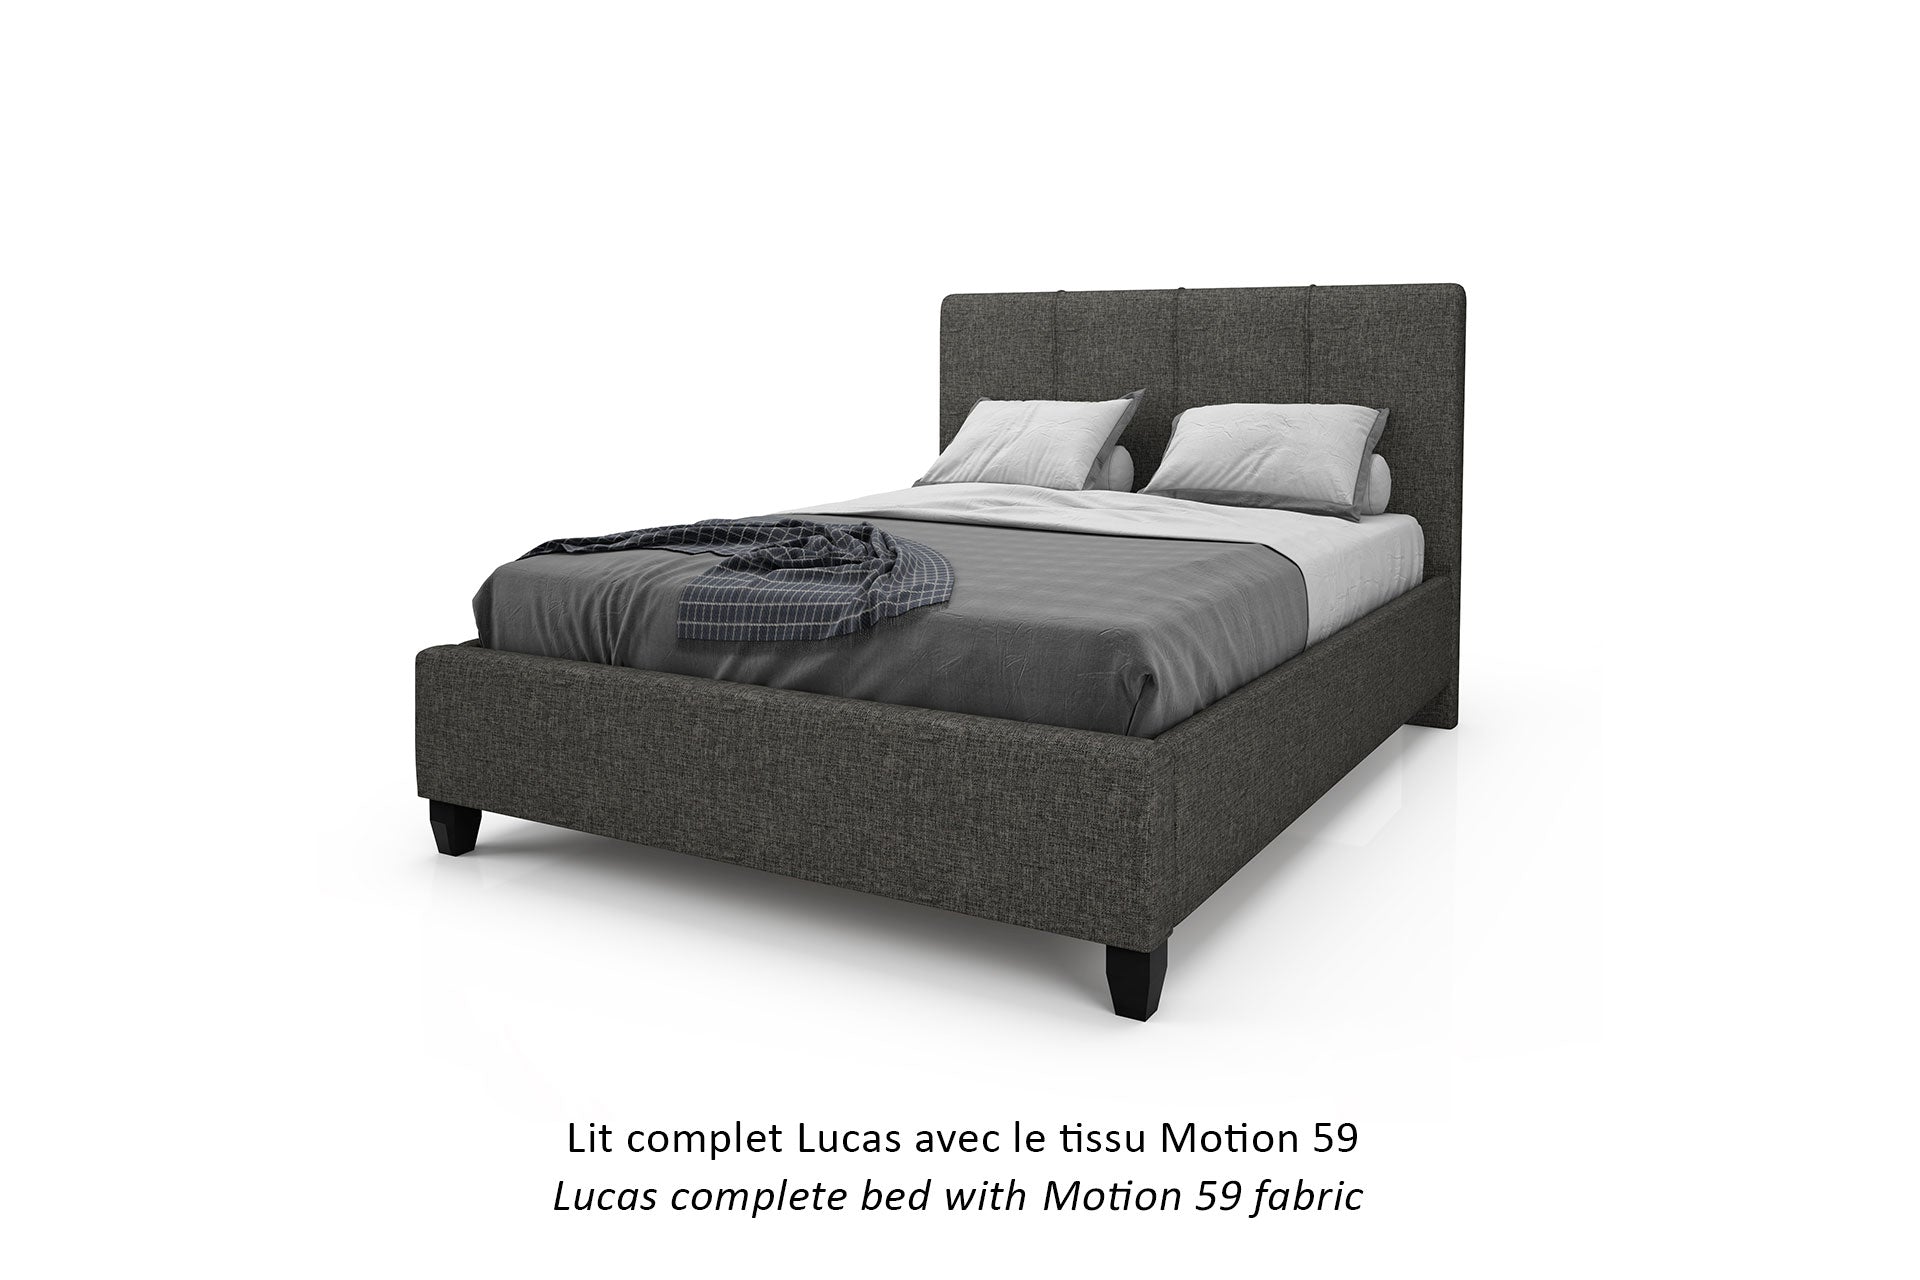 "Lucas" Upholstered Bed - Made in Canada